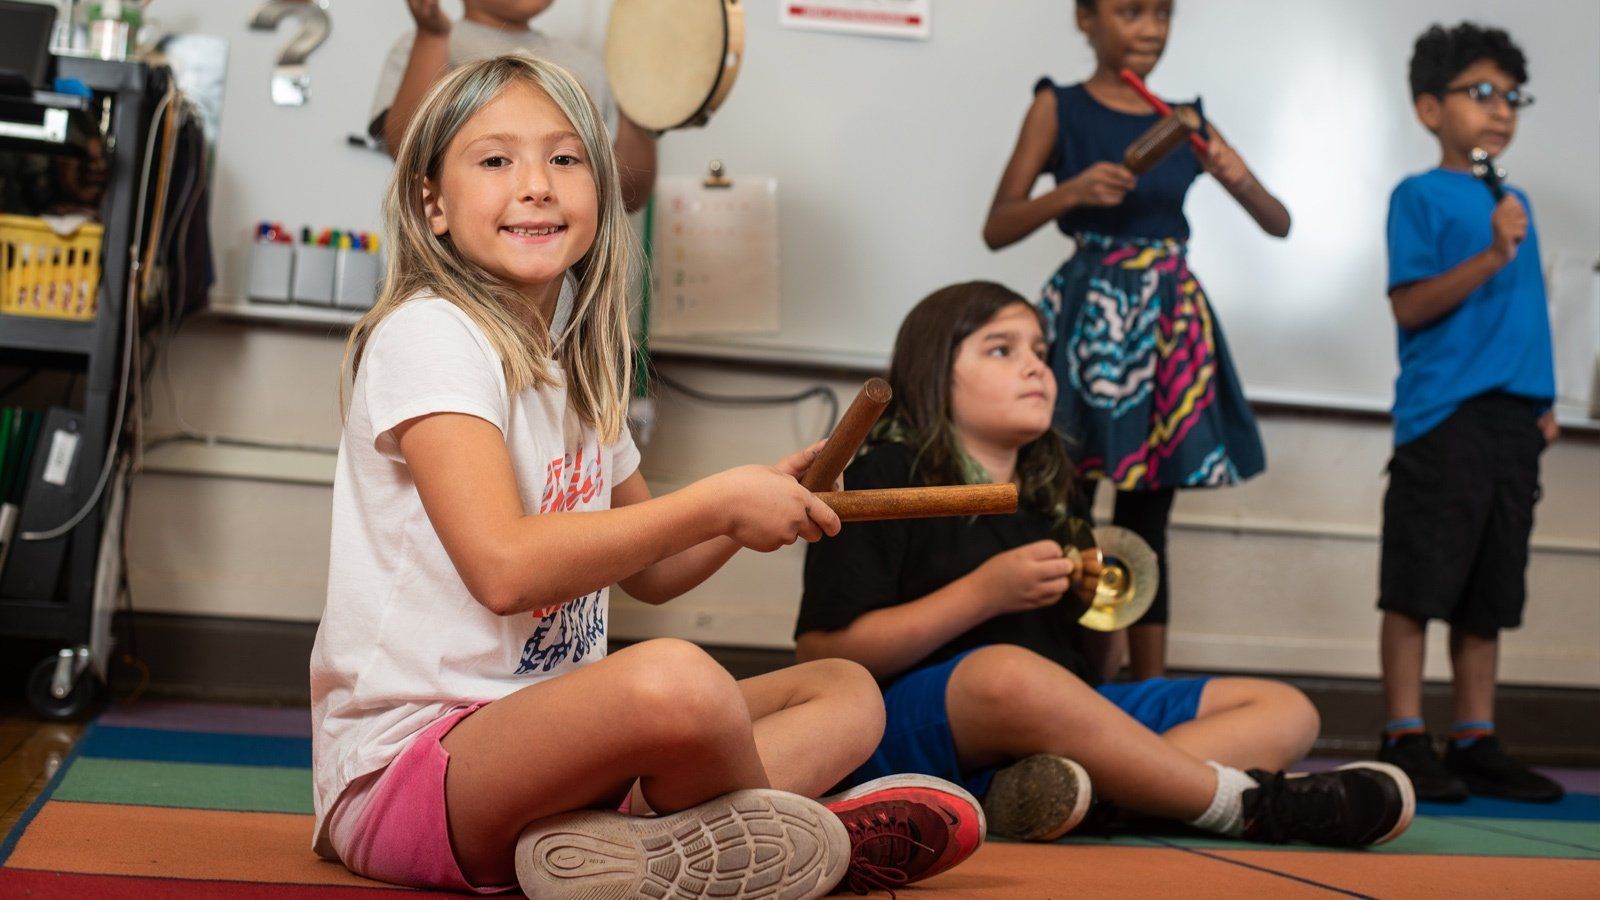 Kids learning to play percussion instruments